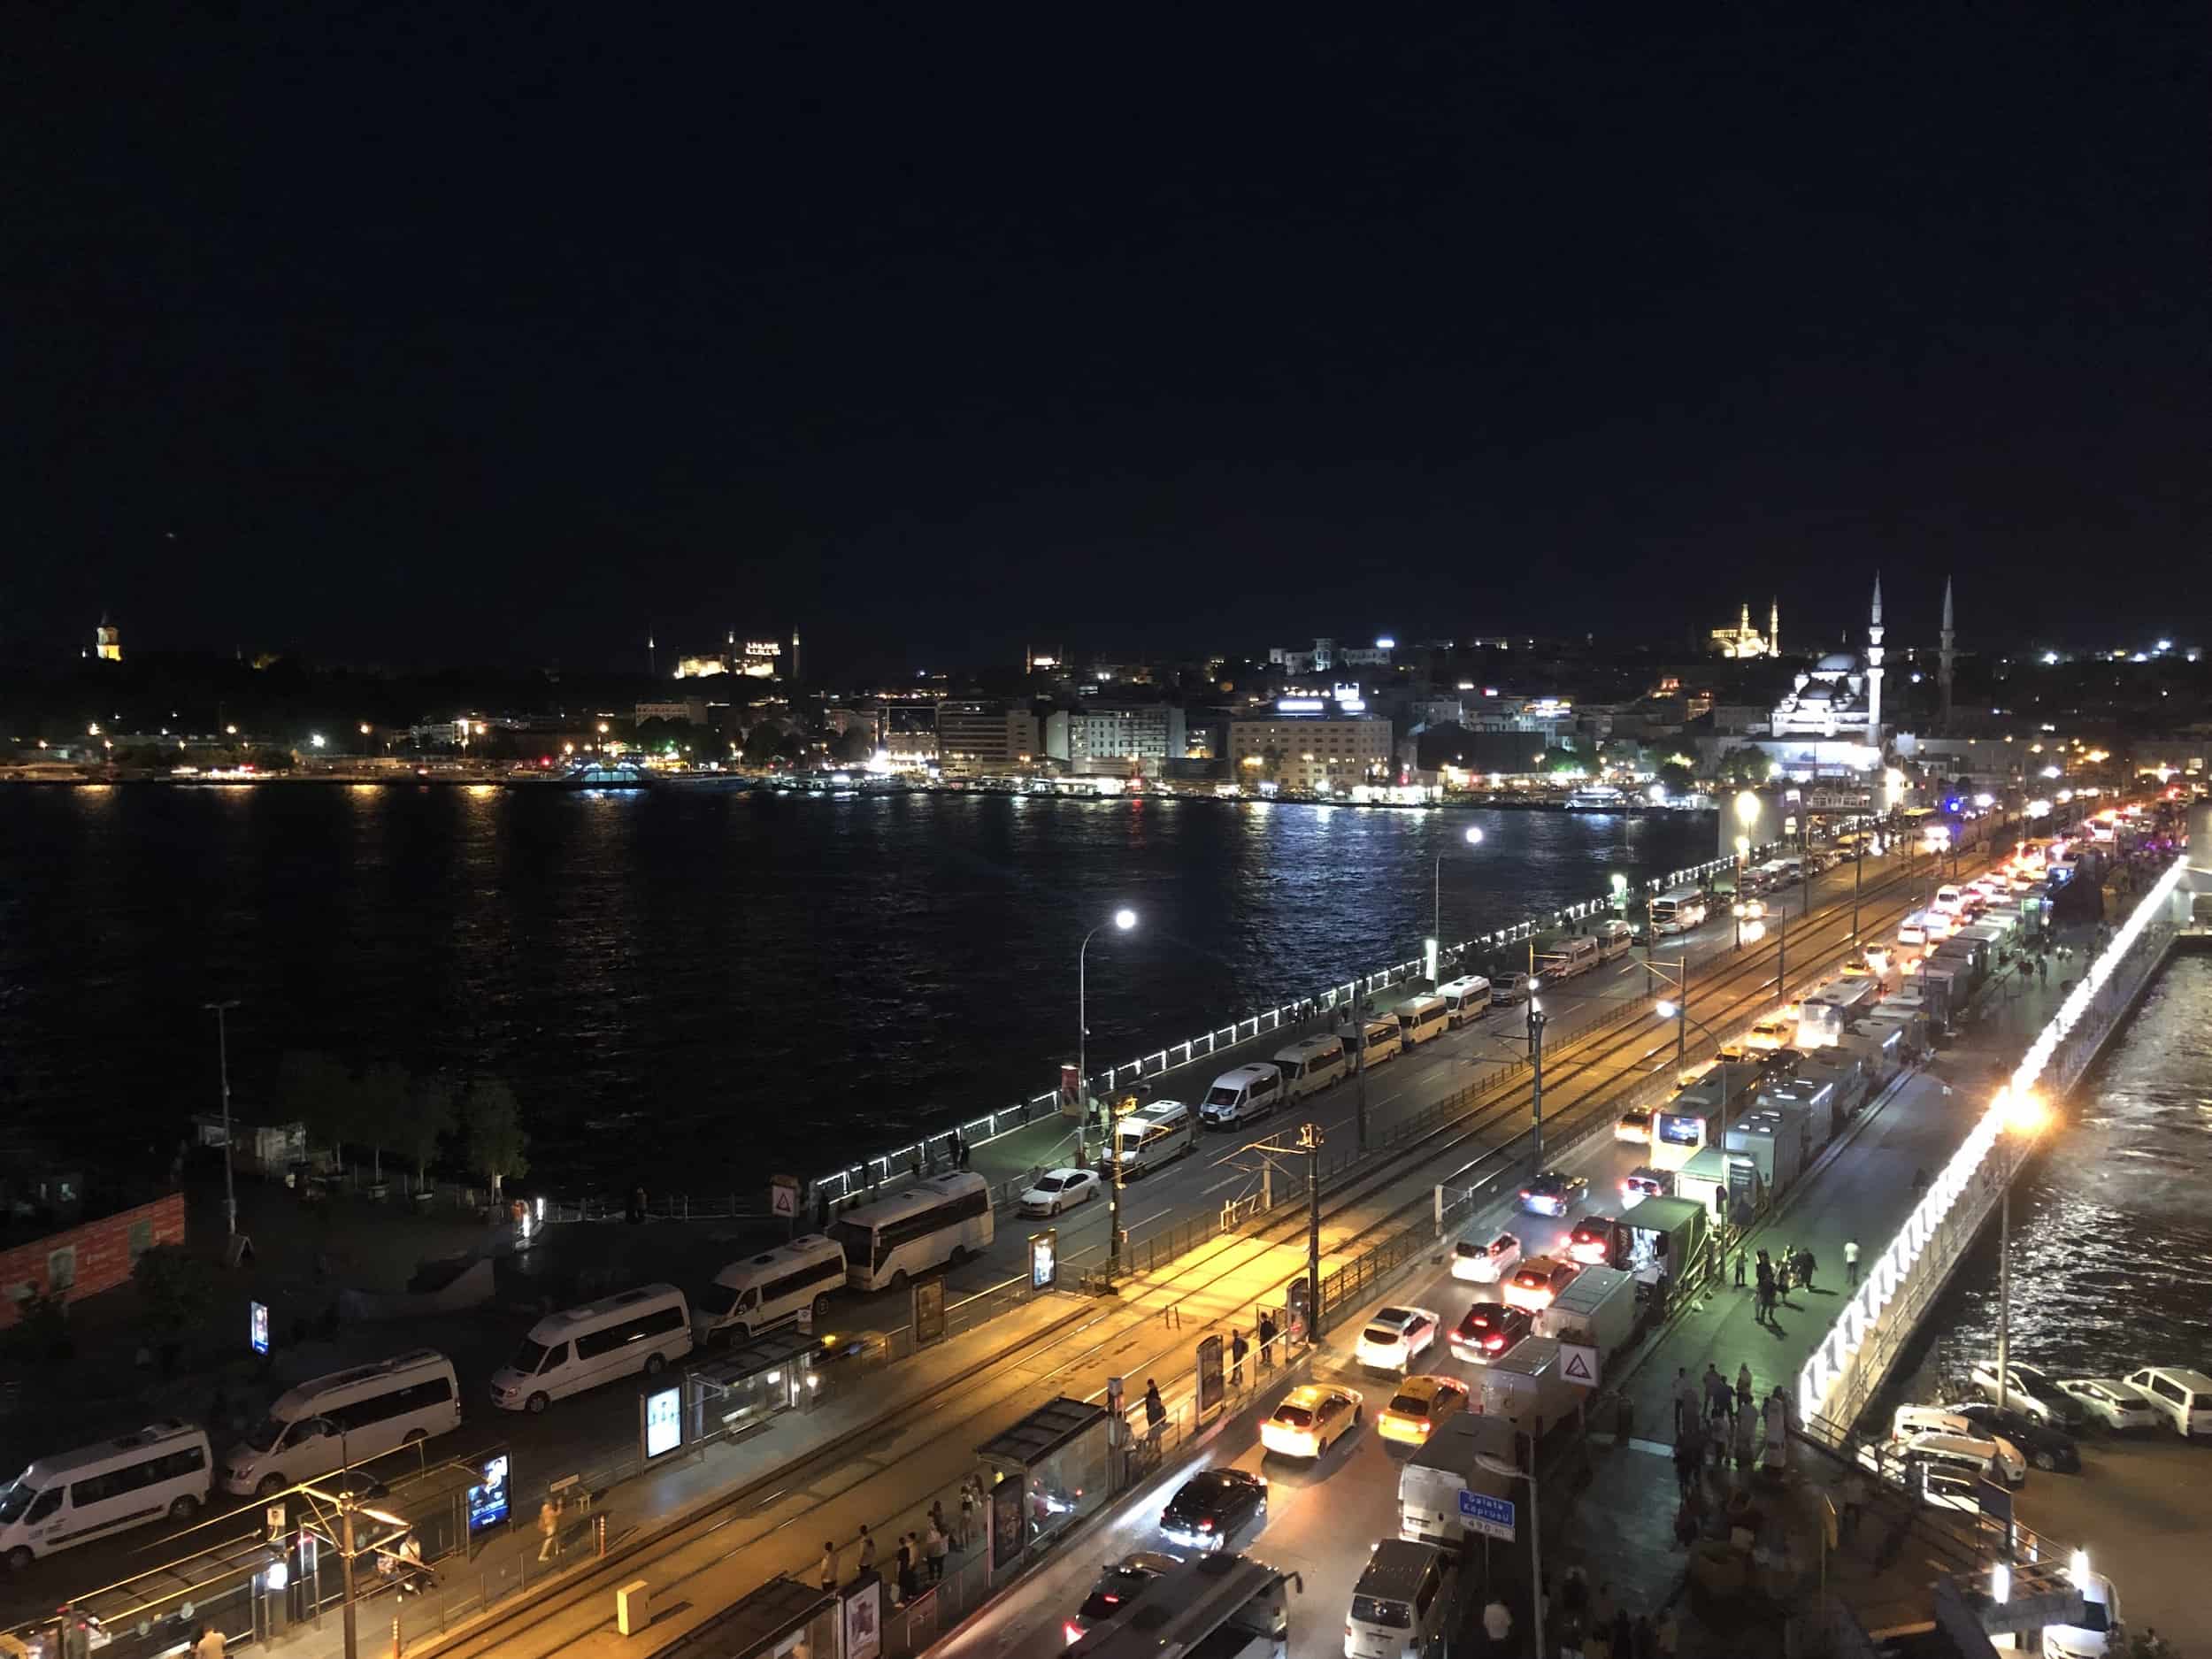 View from the rooftop terrace at night at the Nordstern Hotel in Istanbul, Turkey